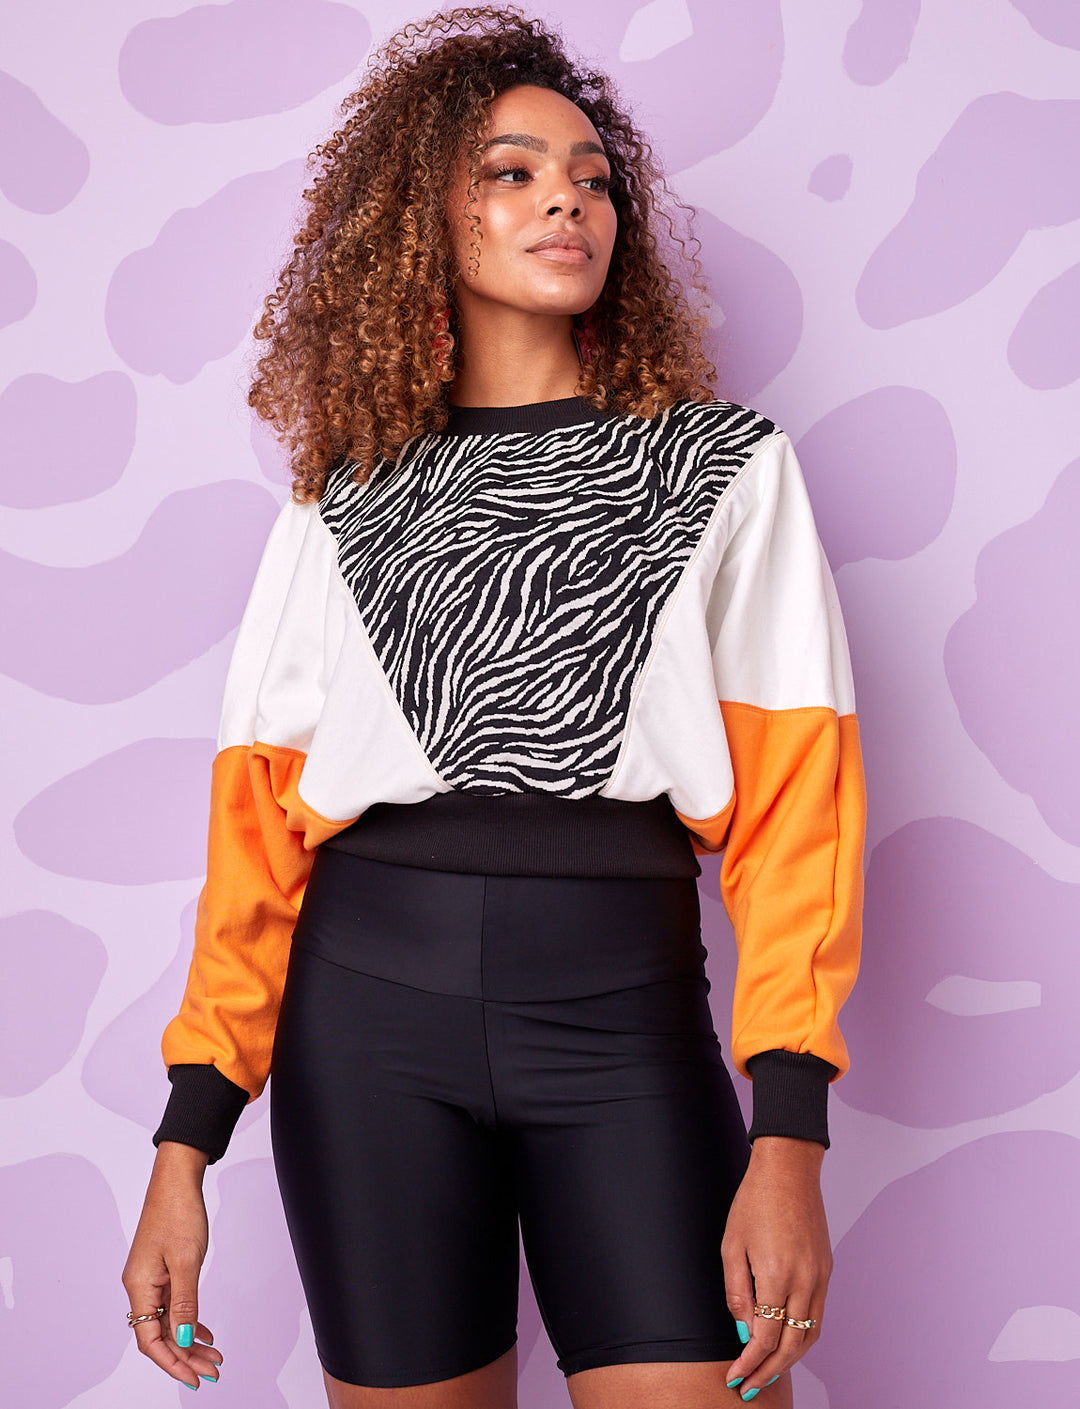 A model wearing a burnt soul cropped sweatshirt in black and white zebra print with orange and black panels and wearing black cycling shorts